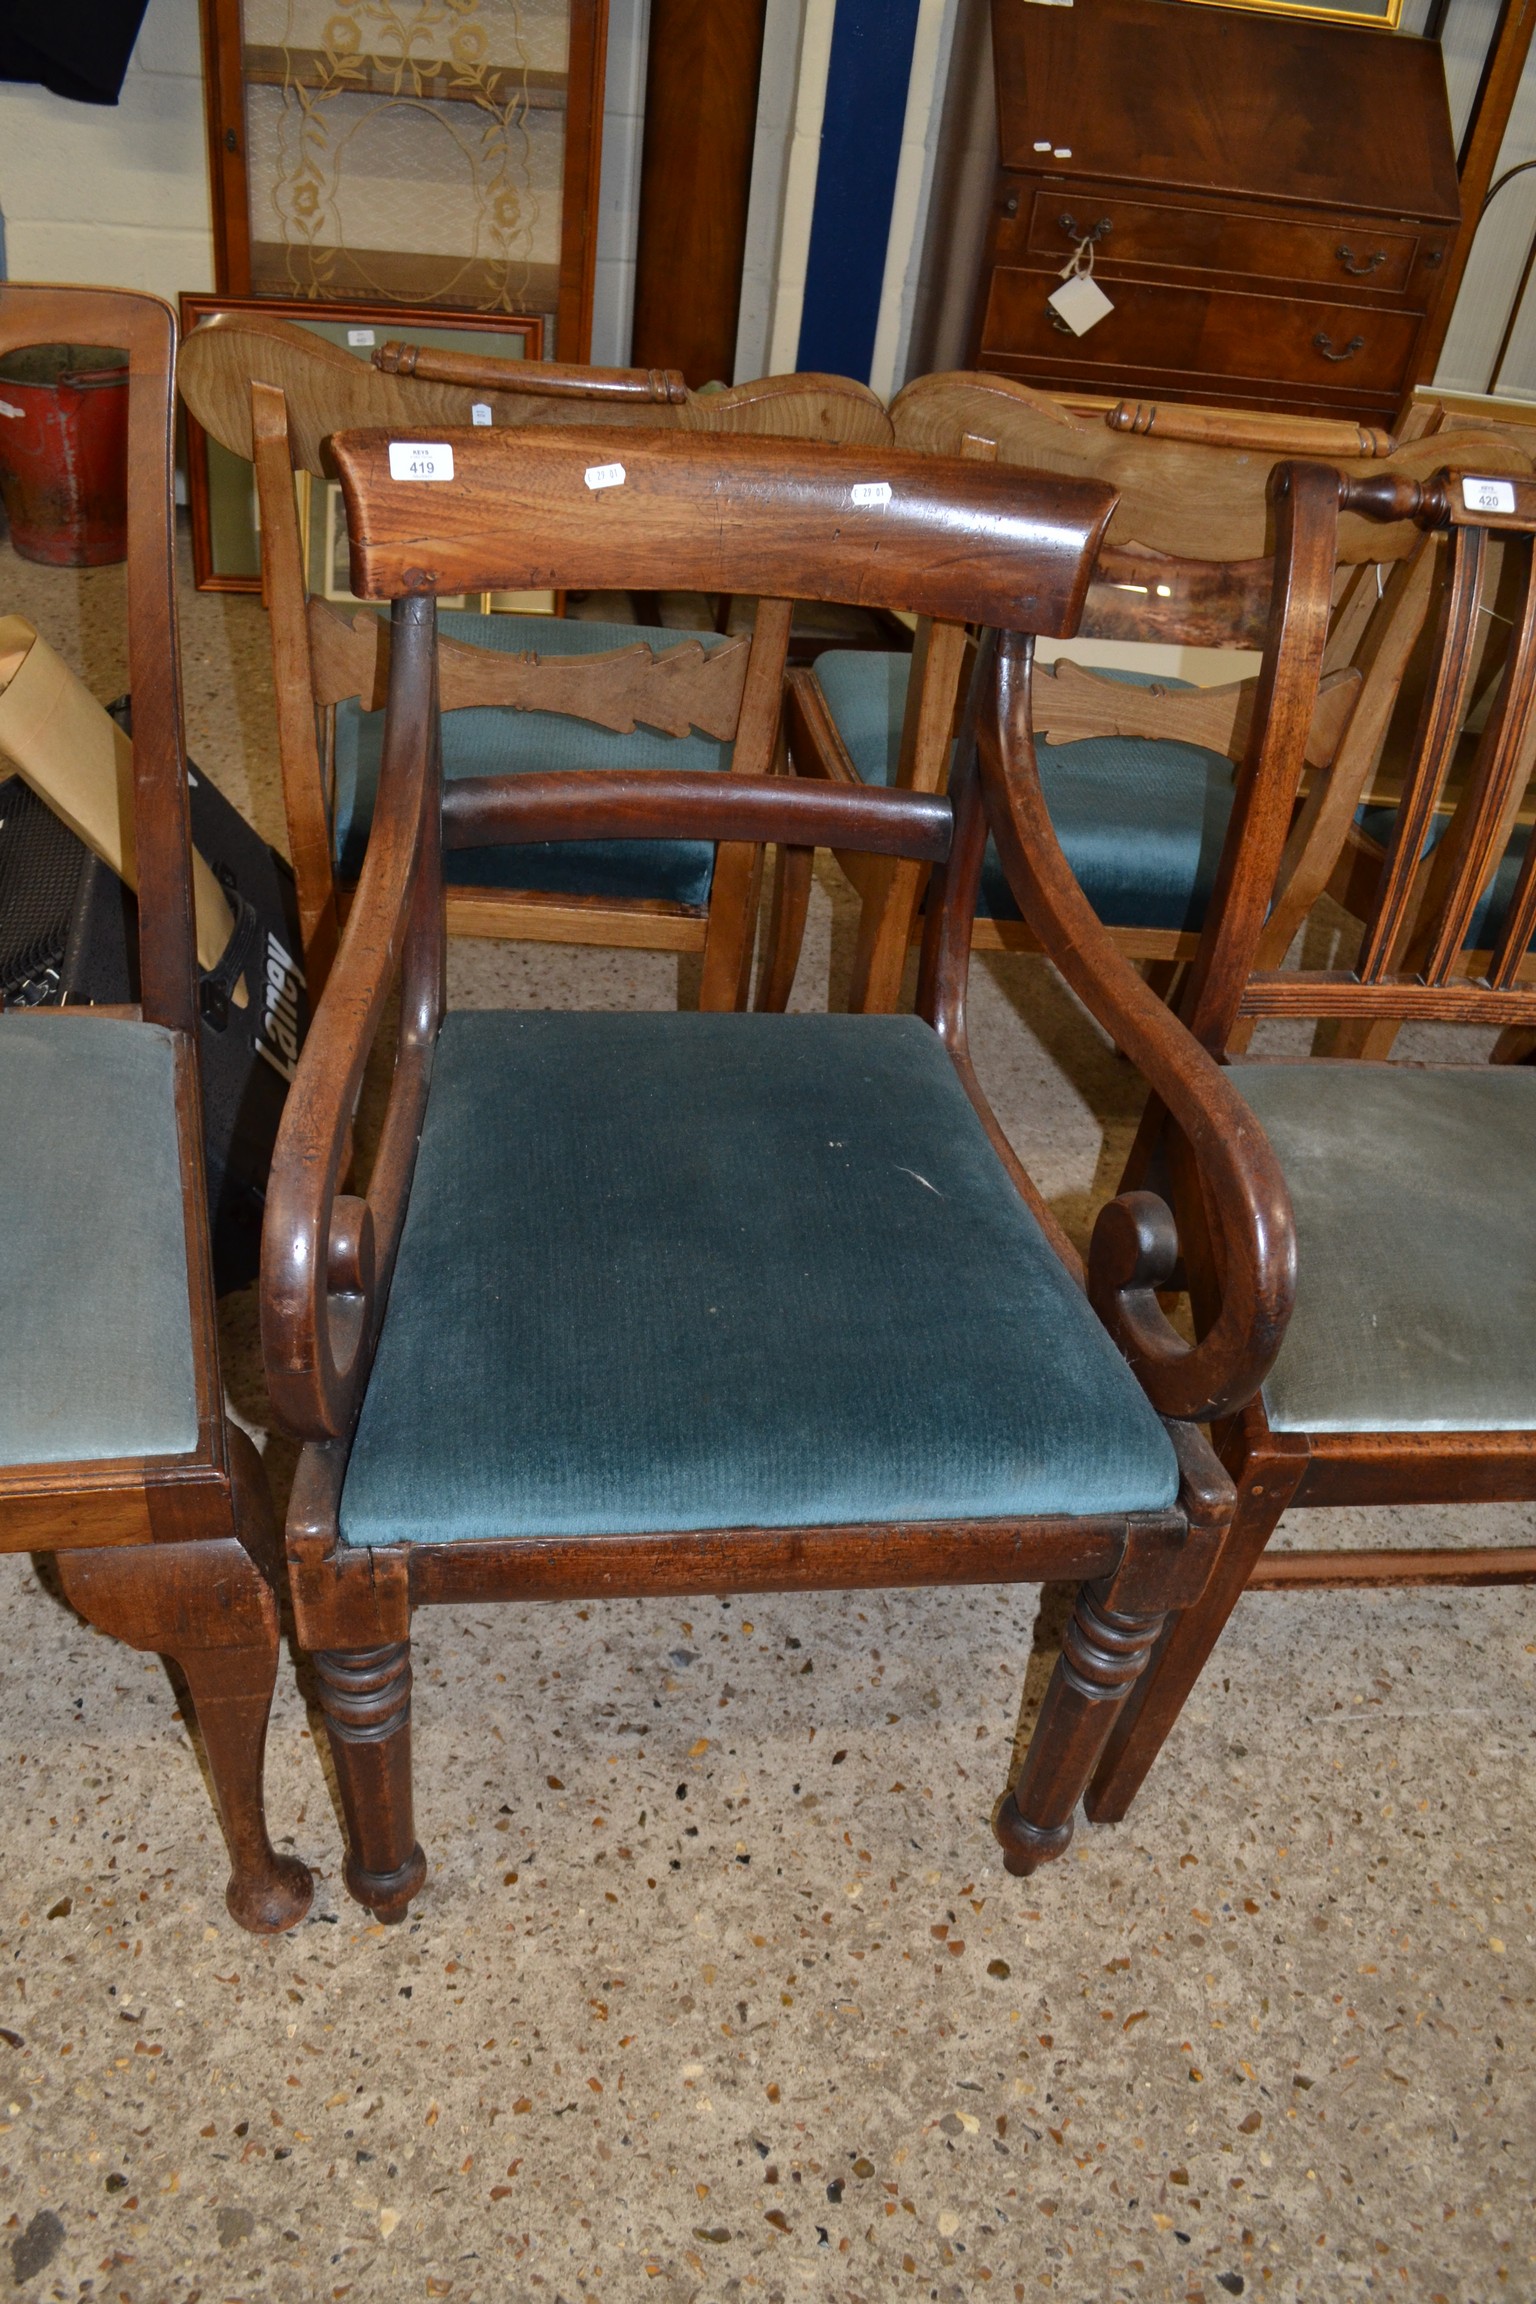 VICTORIAN MAHOGANY SCROLL ARMED CARVER CHAIR WITH TURNED LEGS AND PUSH OUT SEATS